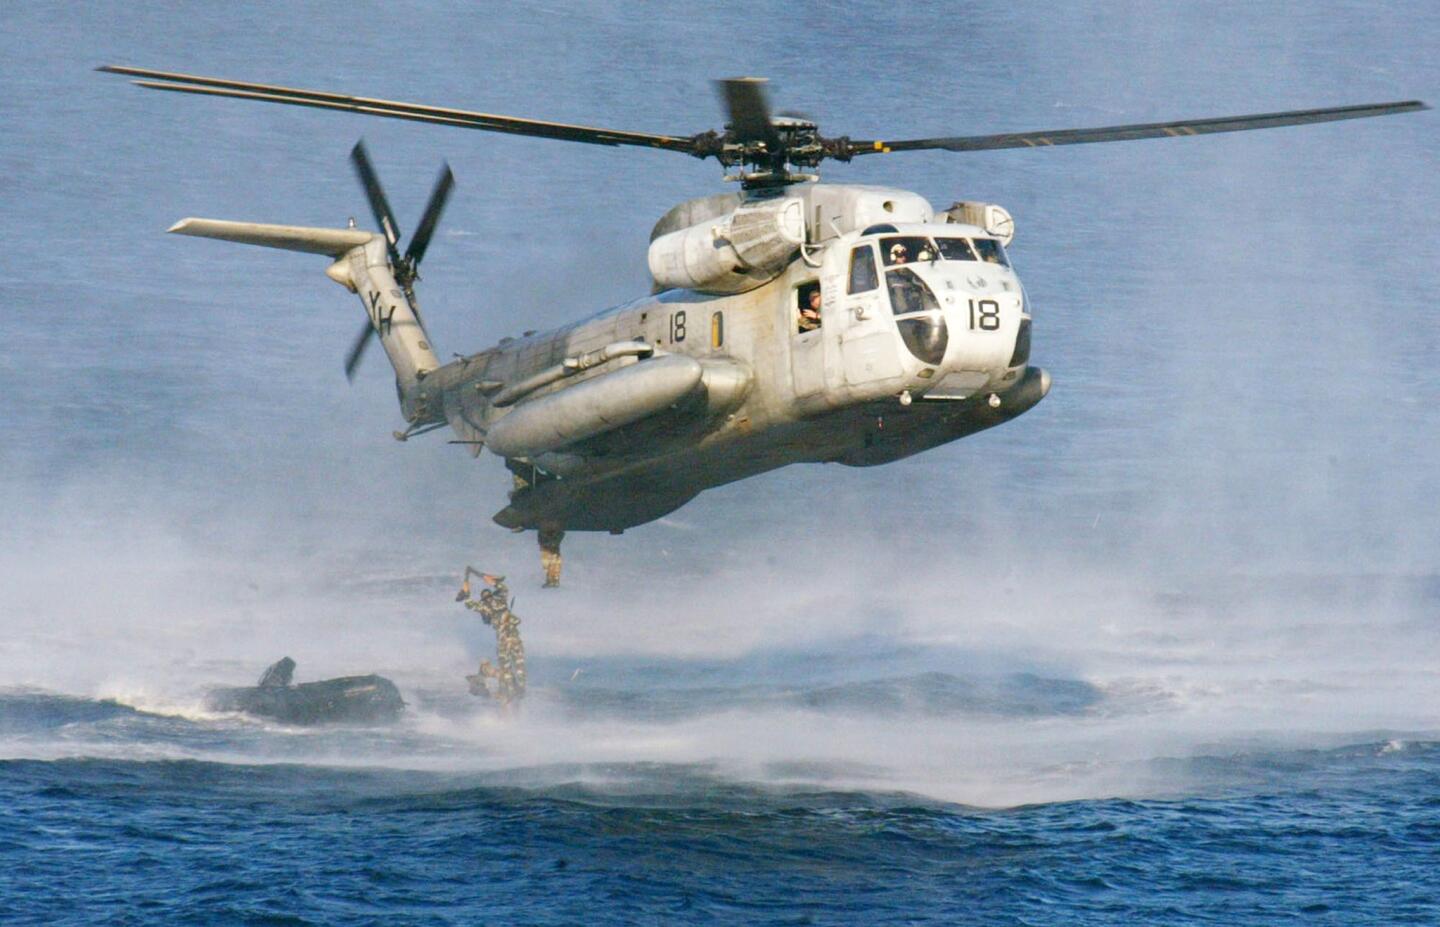 U.S. Marines jump from a CH-53D Sea Stallion helicopter in 2013. The U.S. Coast Guard says two of these helicopters have collided off the Hawaiian island of Oahu.